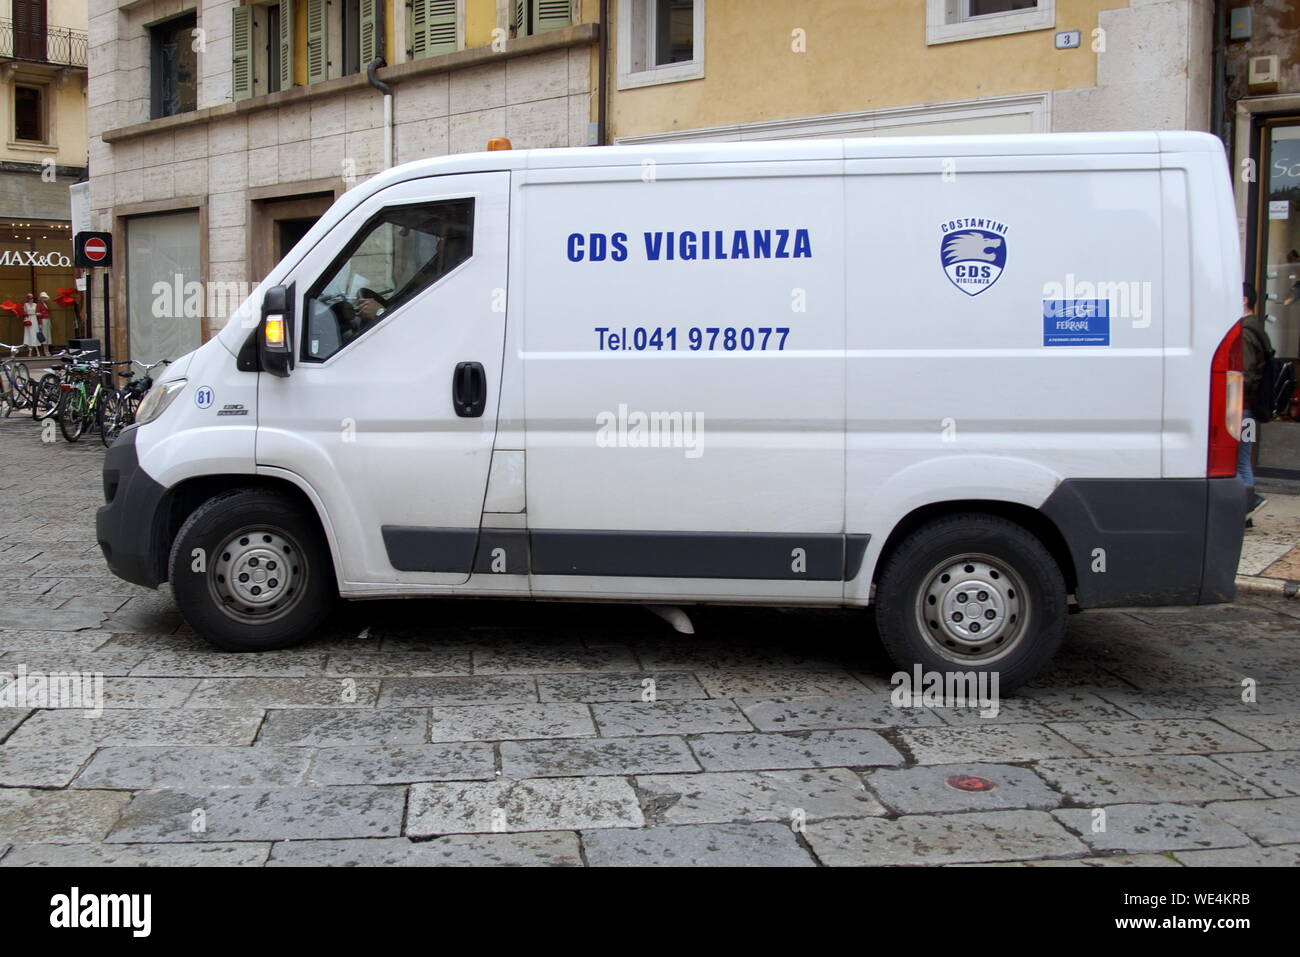 Verona, Italy - April 29, 2019: Italian CDS Vigilanza private security and patrol van passing by in the center of Verona. Stock Photo